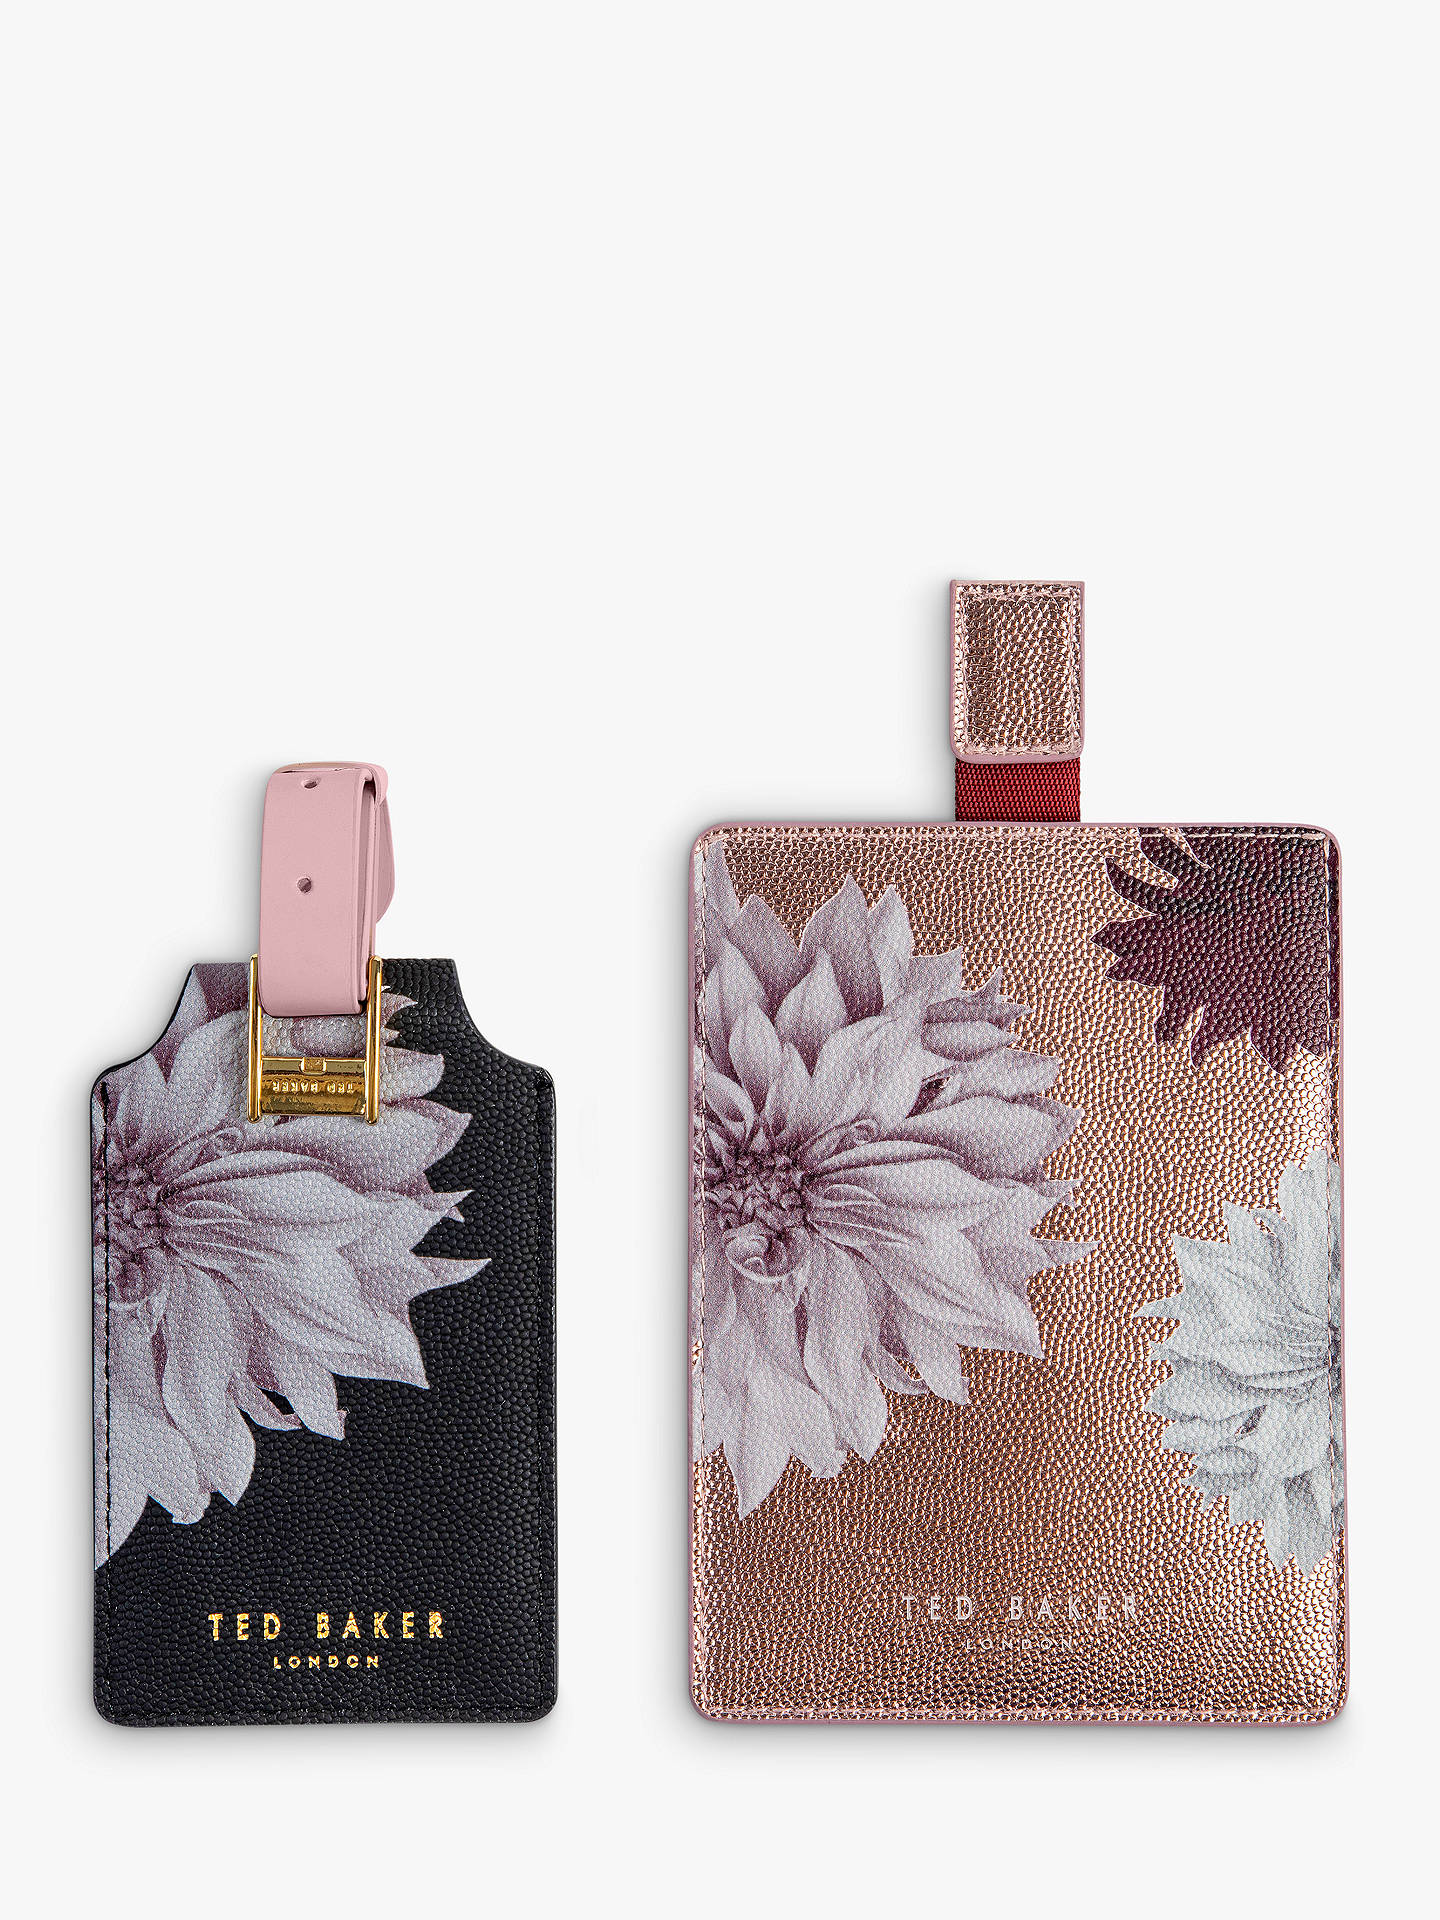 ted baker travel in style gift set